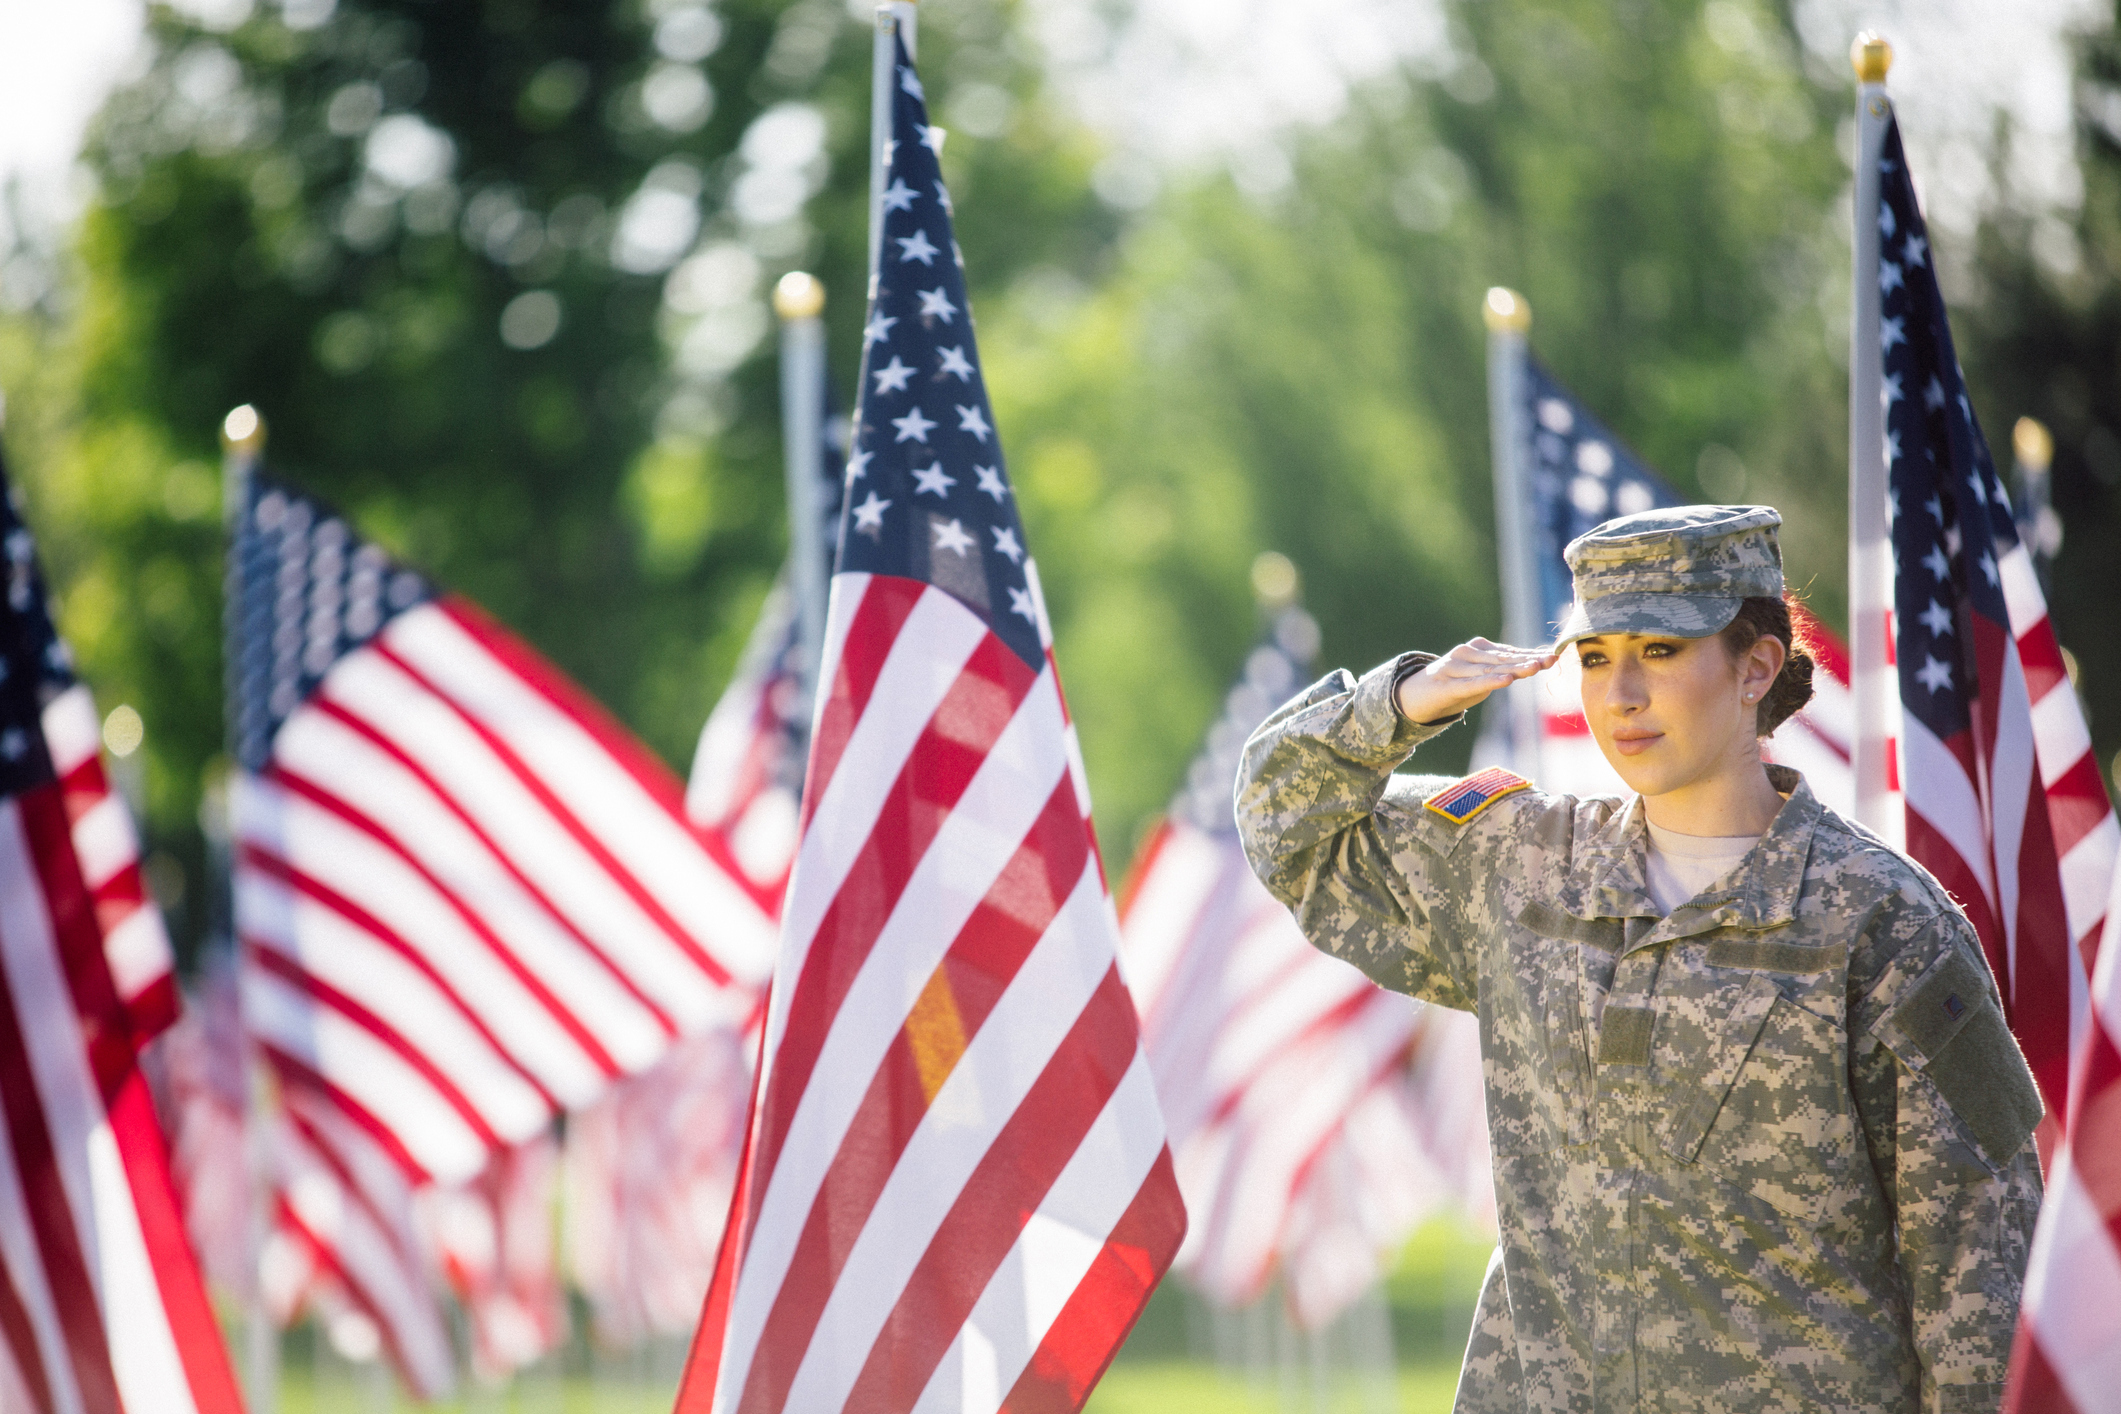 A young service woman salutes amid a field of American flags.